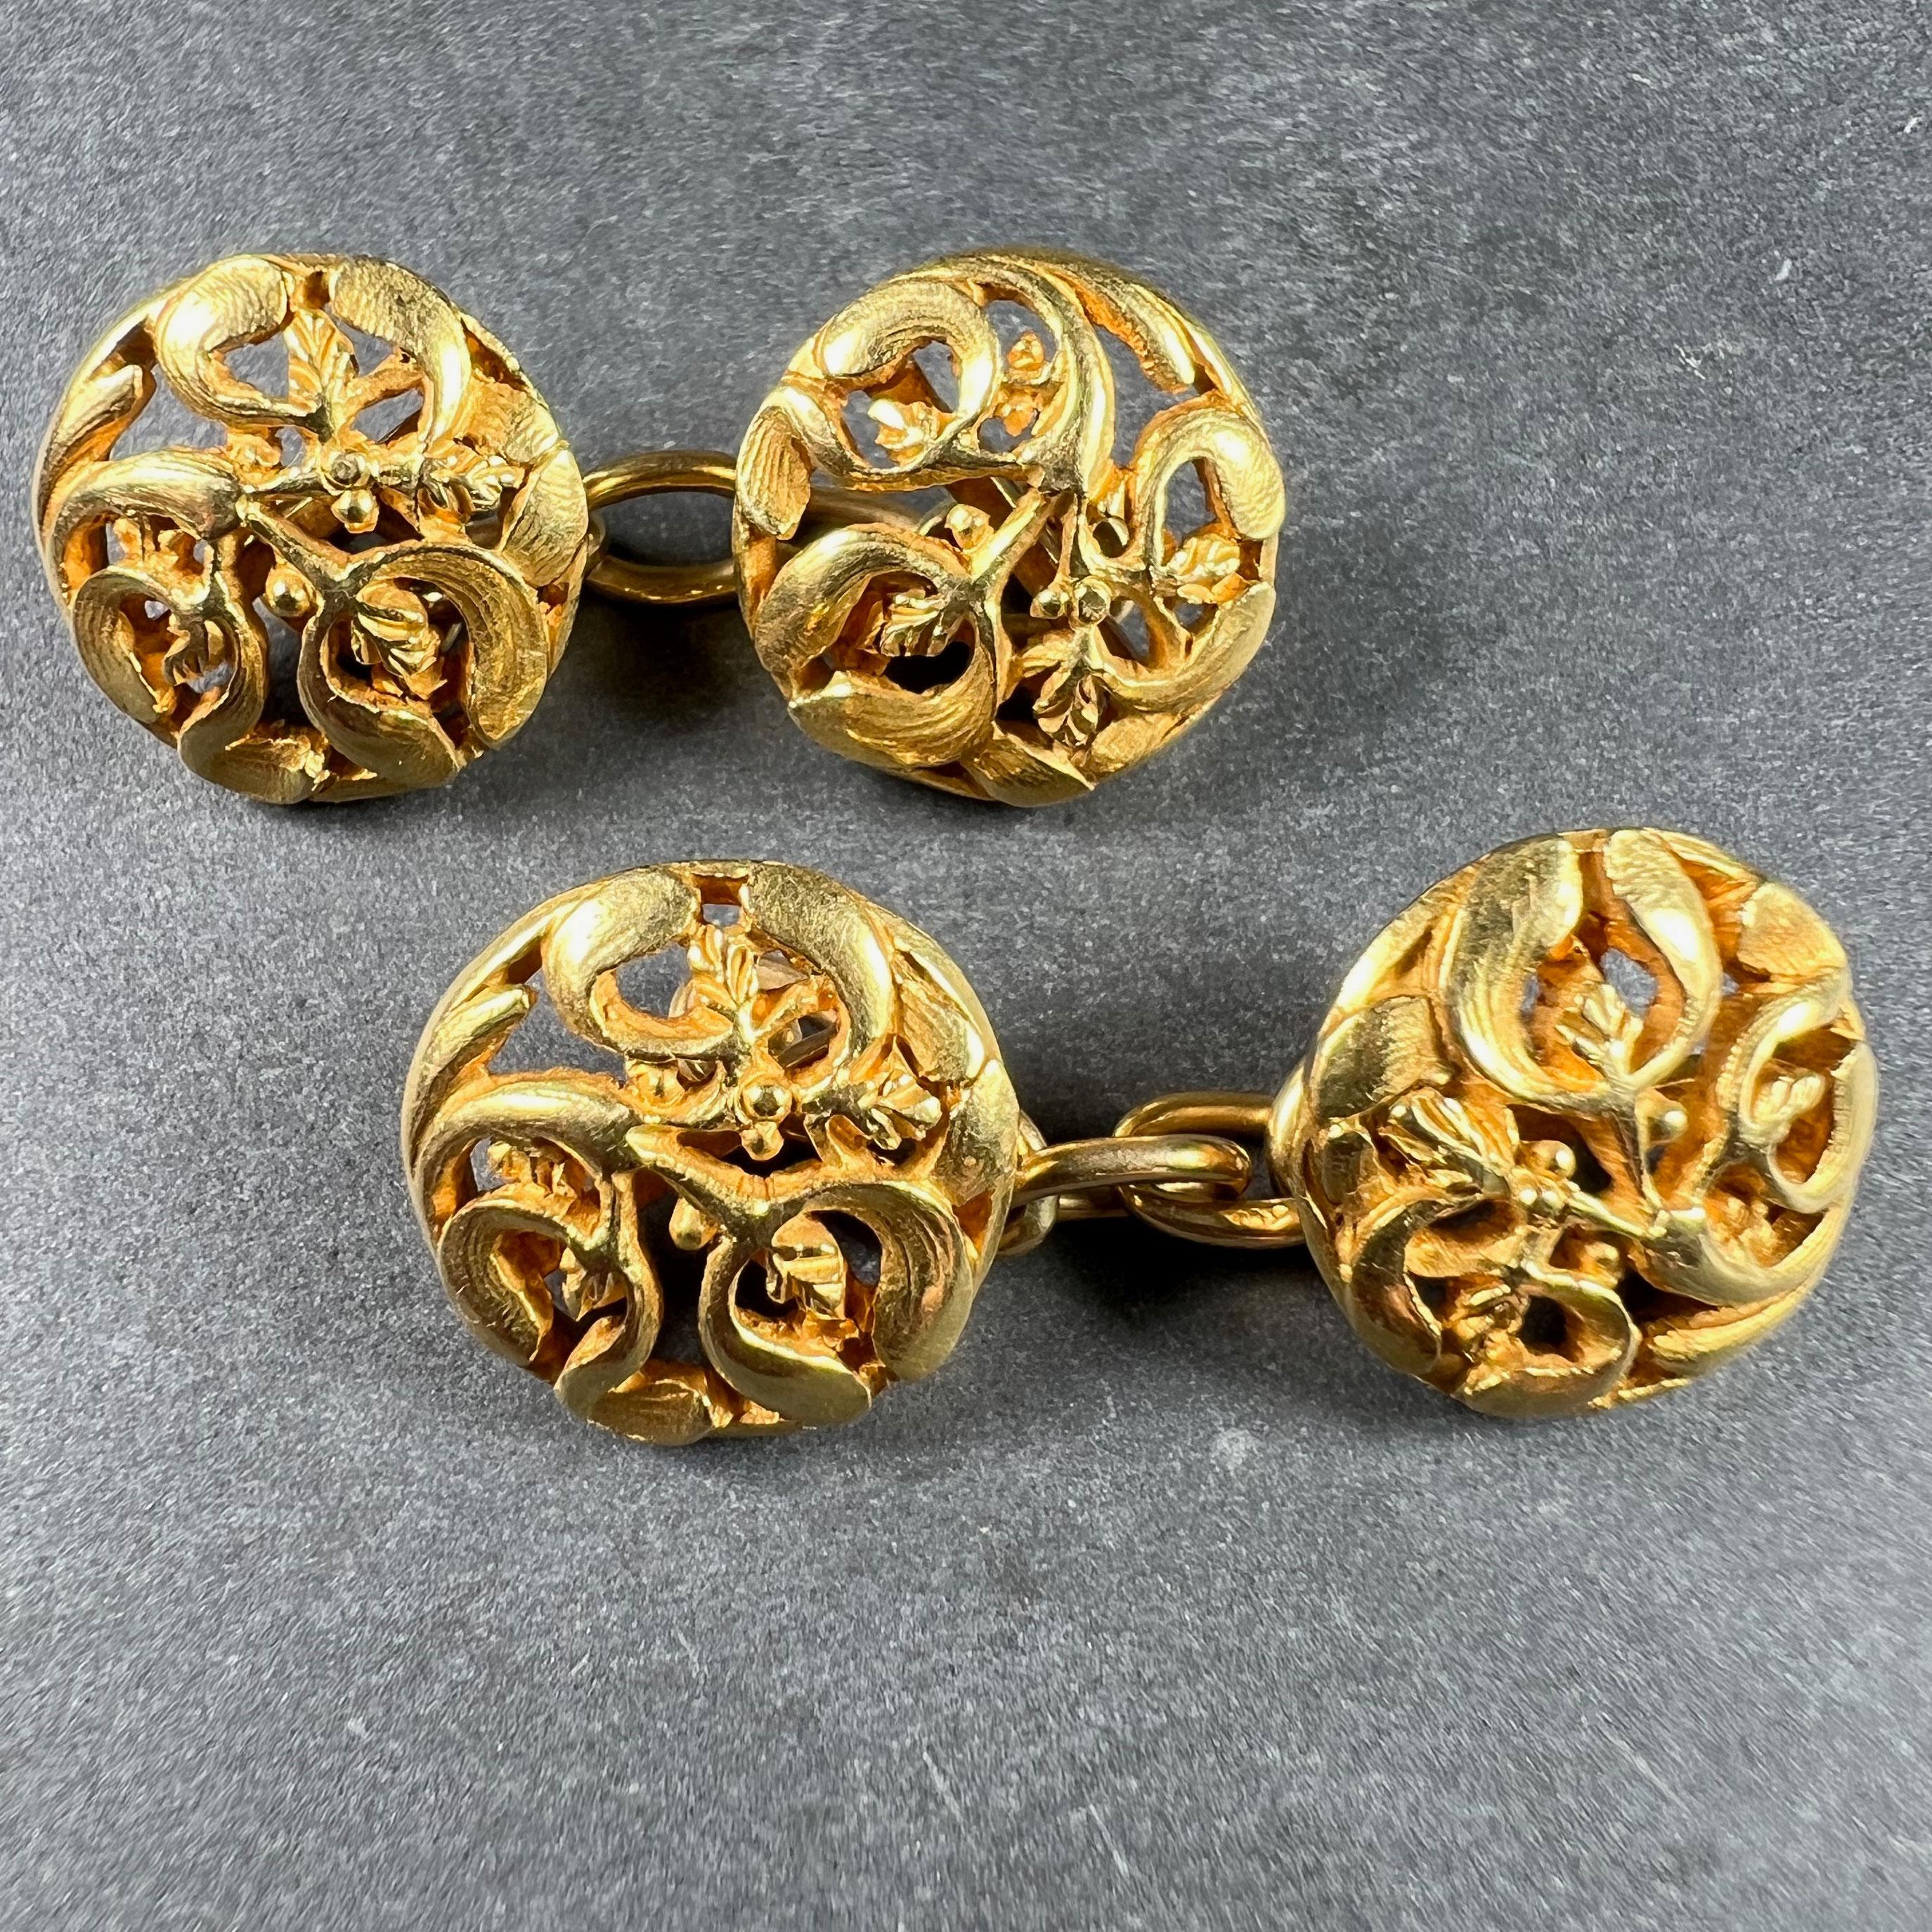 A pair of French Art Nouveau 18 karat (18K) yellow gold cufflinks designed with a pattern of mistletoe leaves. Stamped with the eagle’s head for 18 karat gold and French manufacture and numbered 44340 with a partial maker's mark to one of the